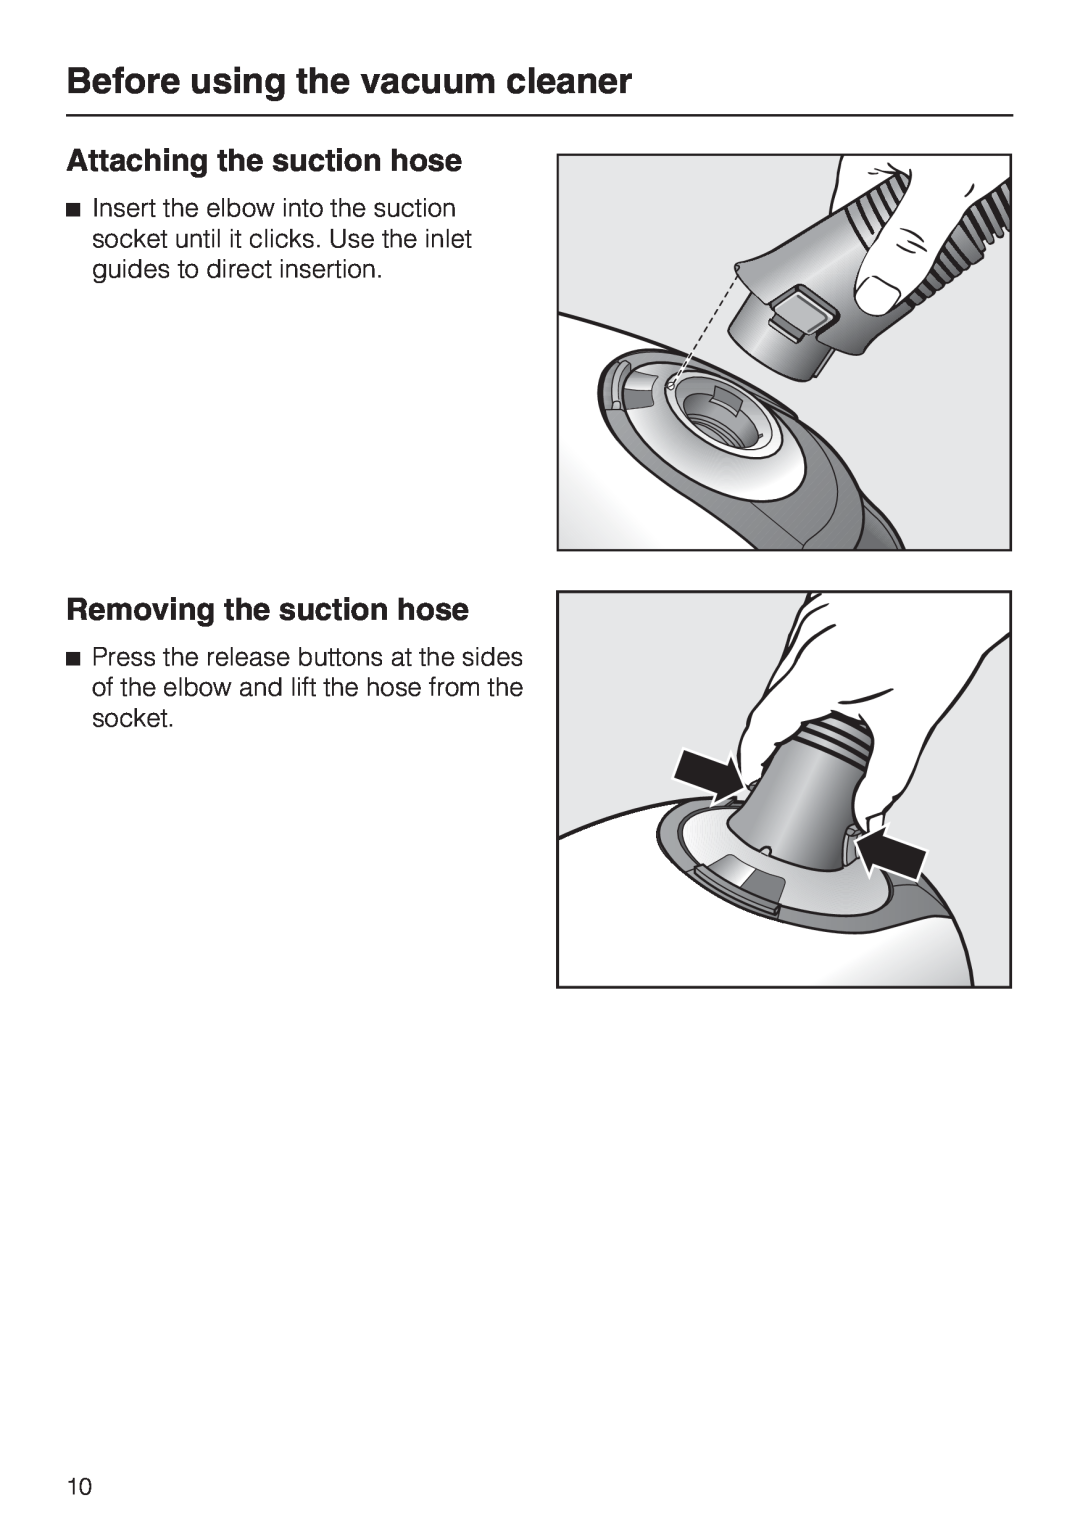 NEC S 5000 operating instructions Before using the vacuum cleaner, Attaching the suction hose, Removing the suction hose 